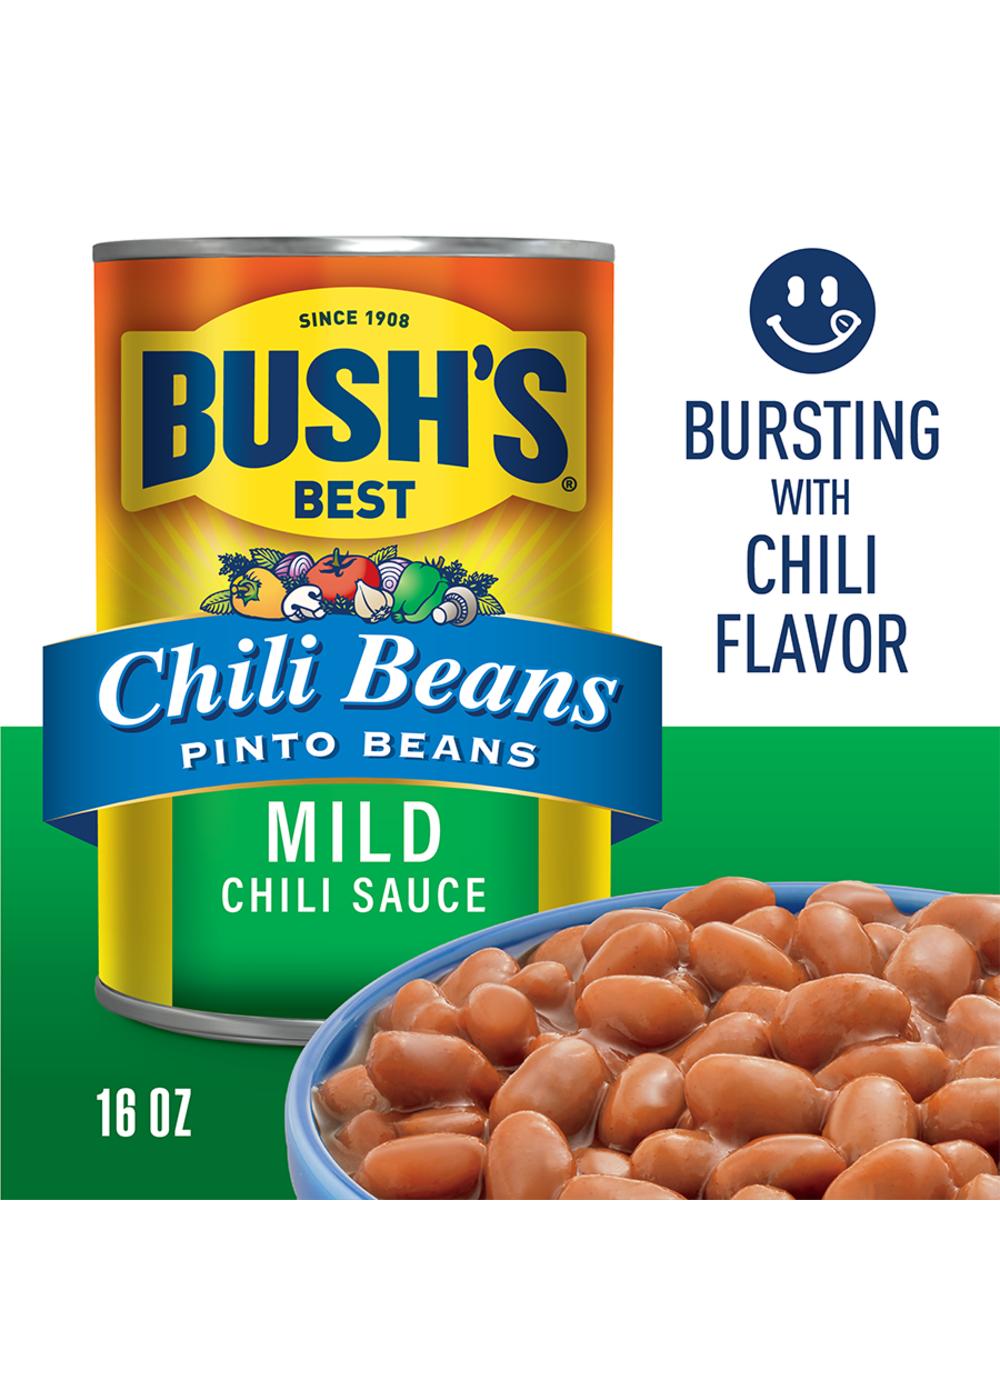 Bush's Best Pinto Beans in a Mild Chili Sauce; image 2 of 5